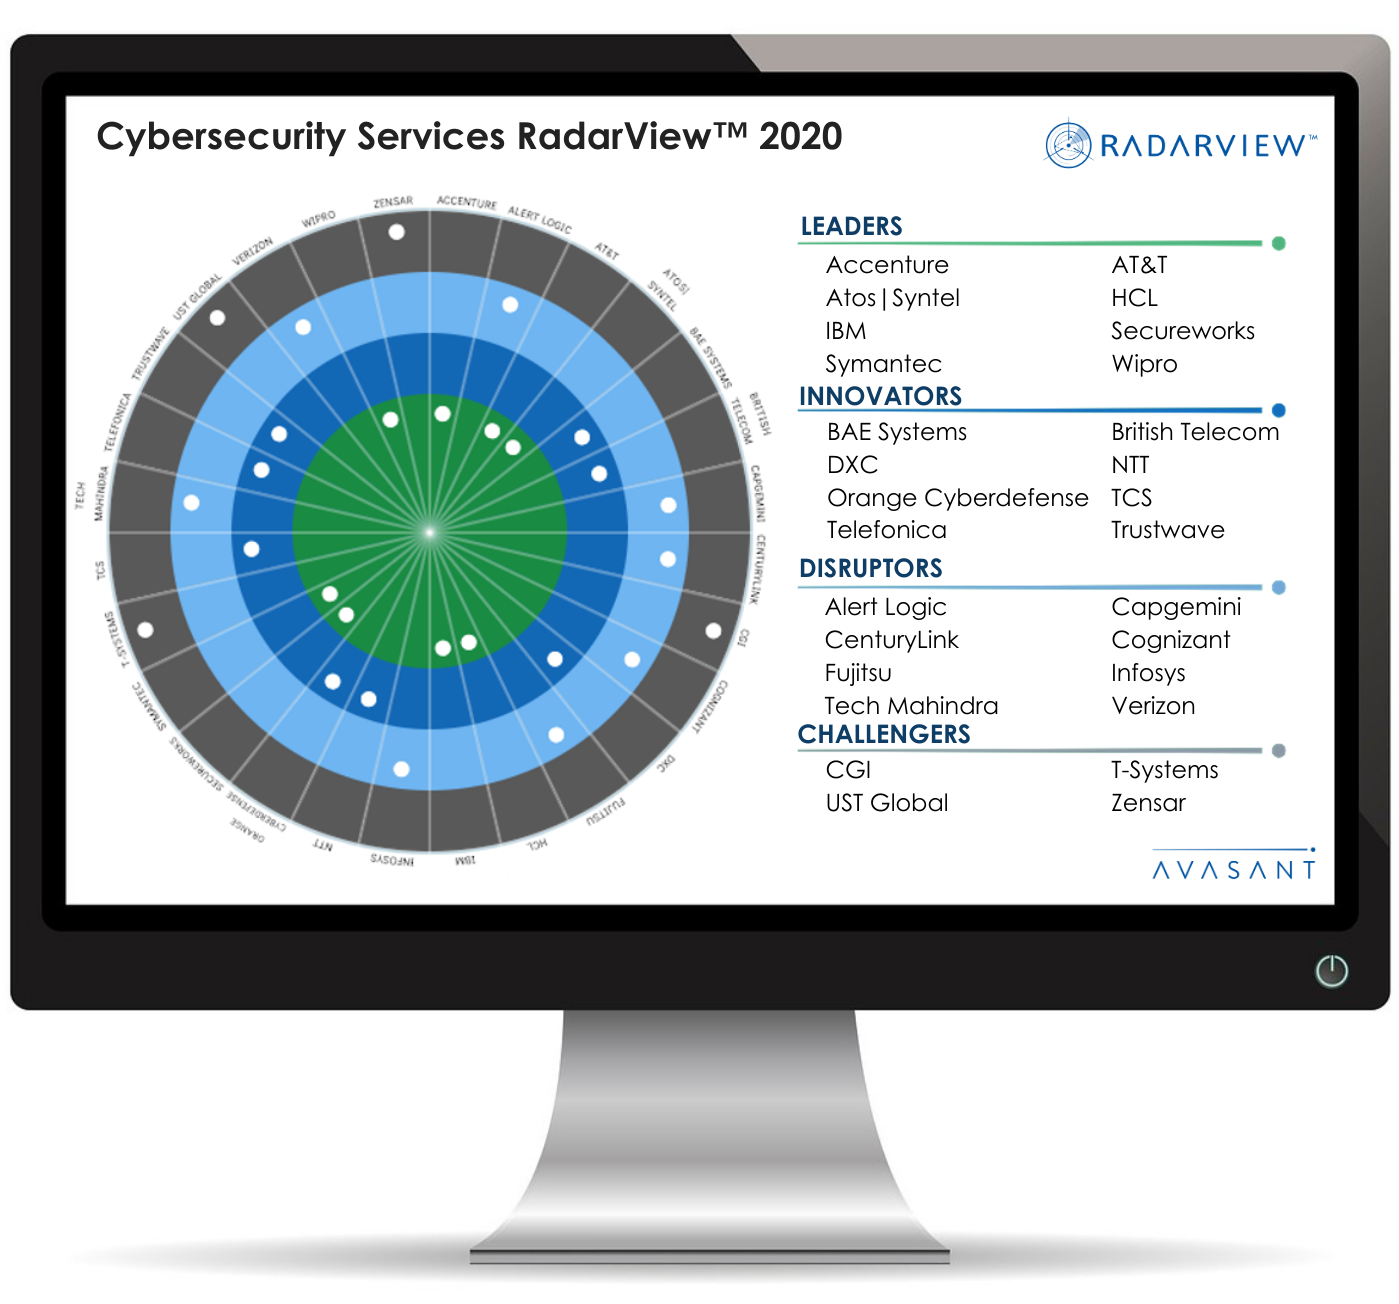 Cybersecurity RV 1 1 - Cybersecurity Services RadarView™ 2020 - Accenture